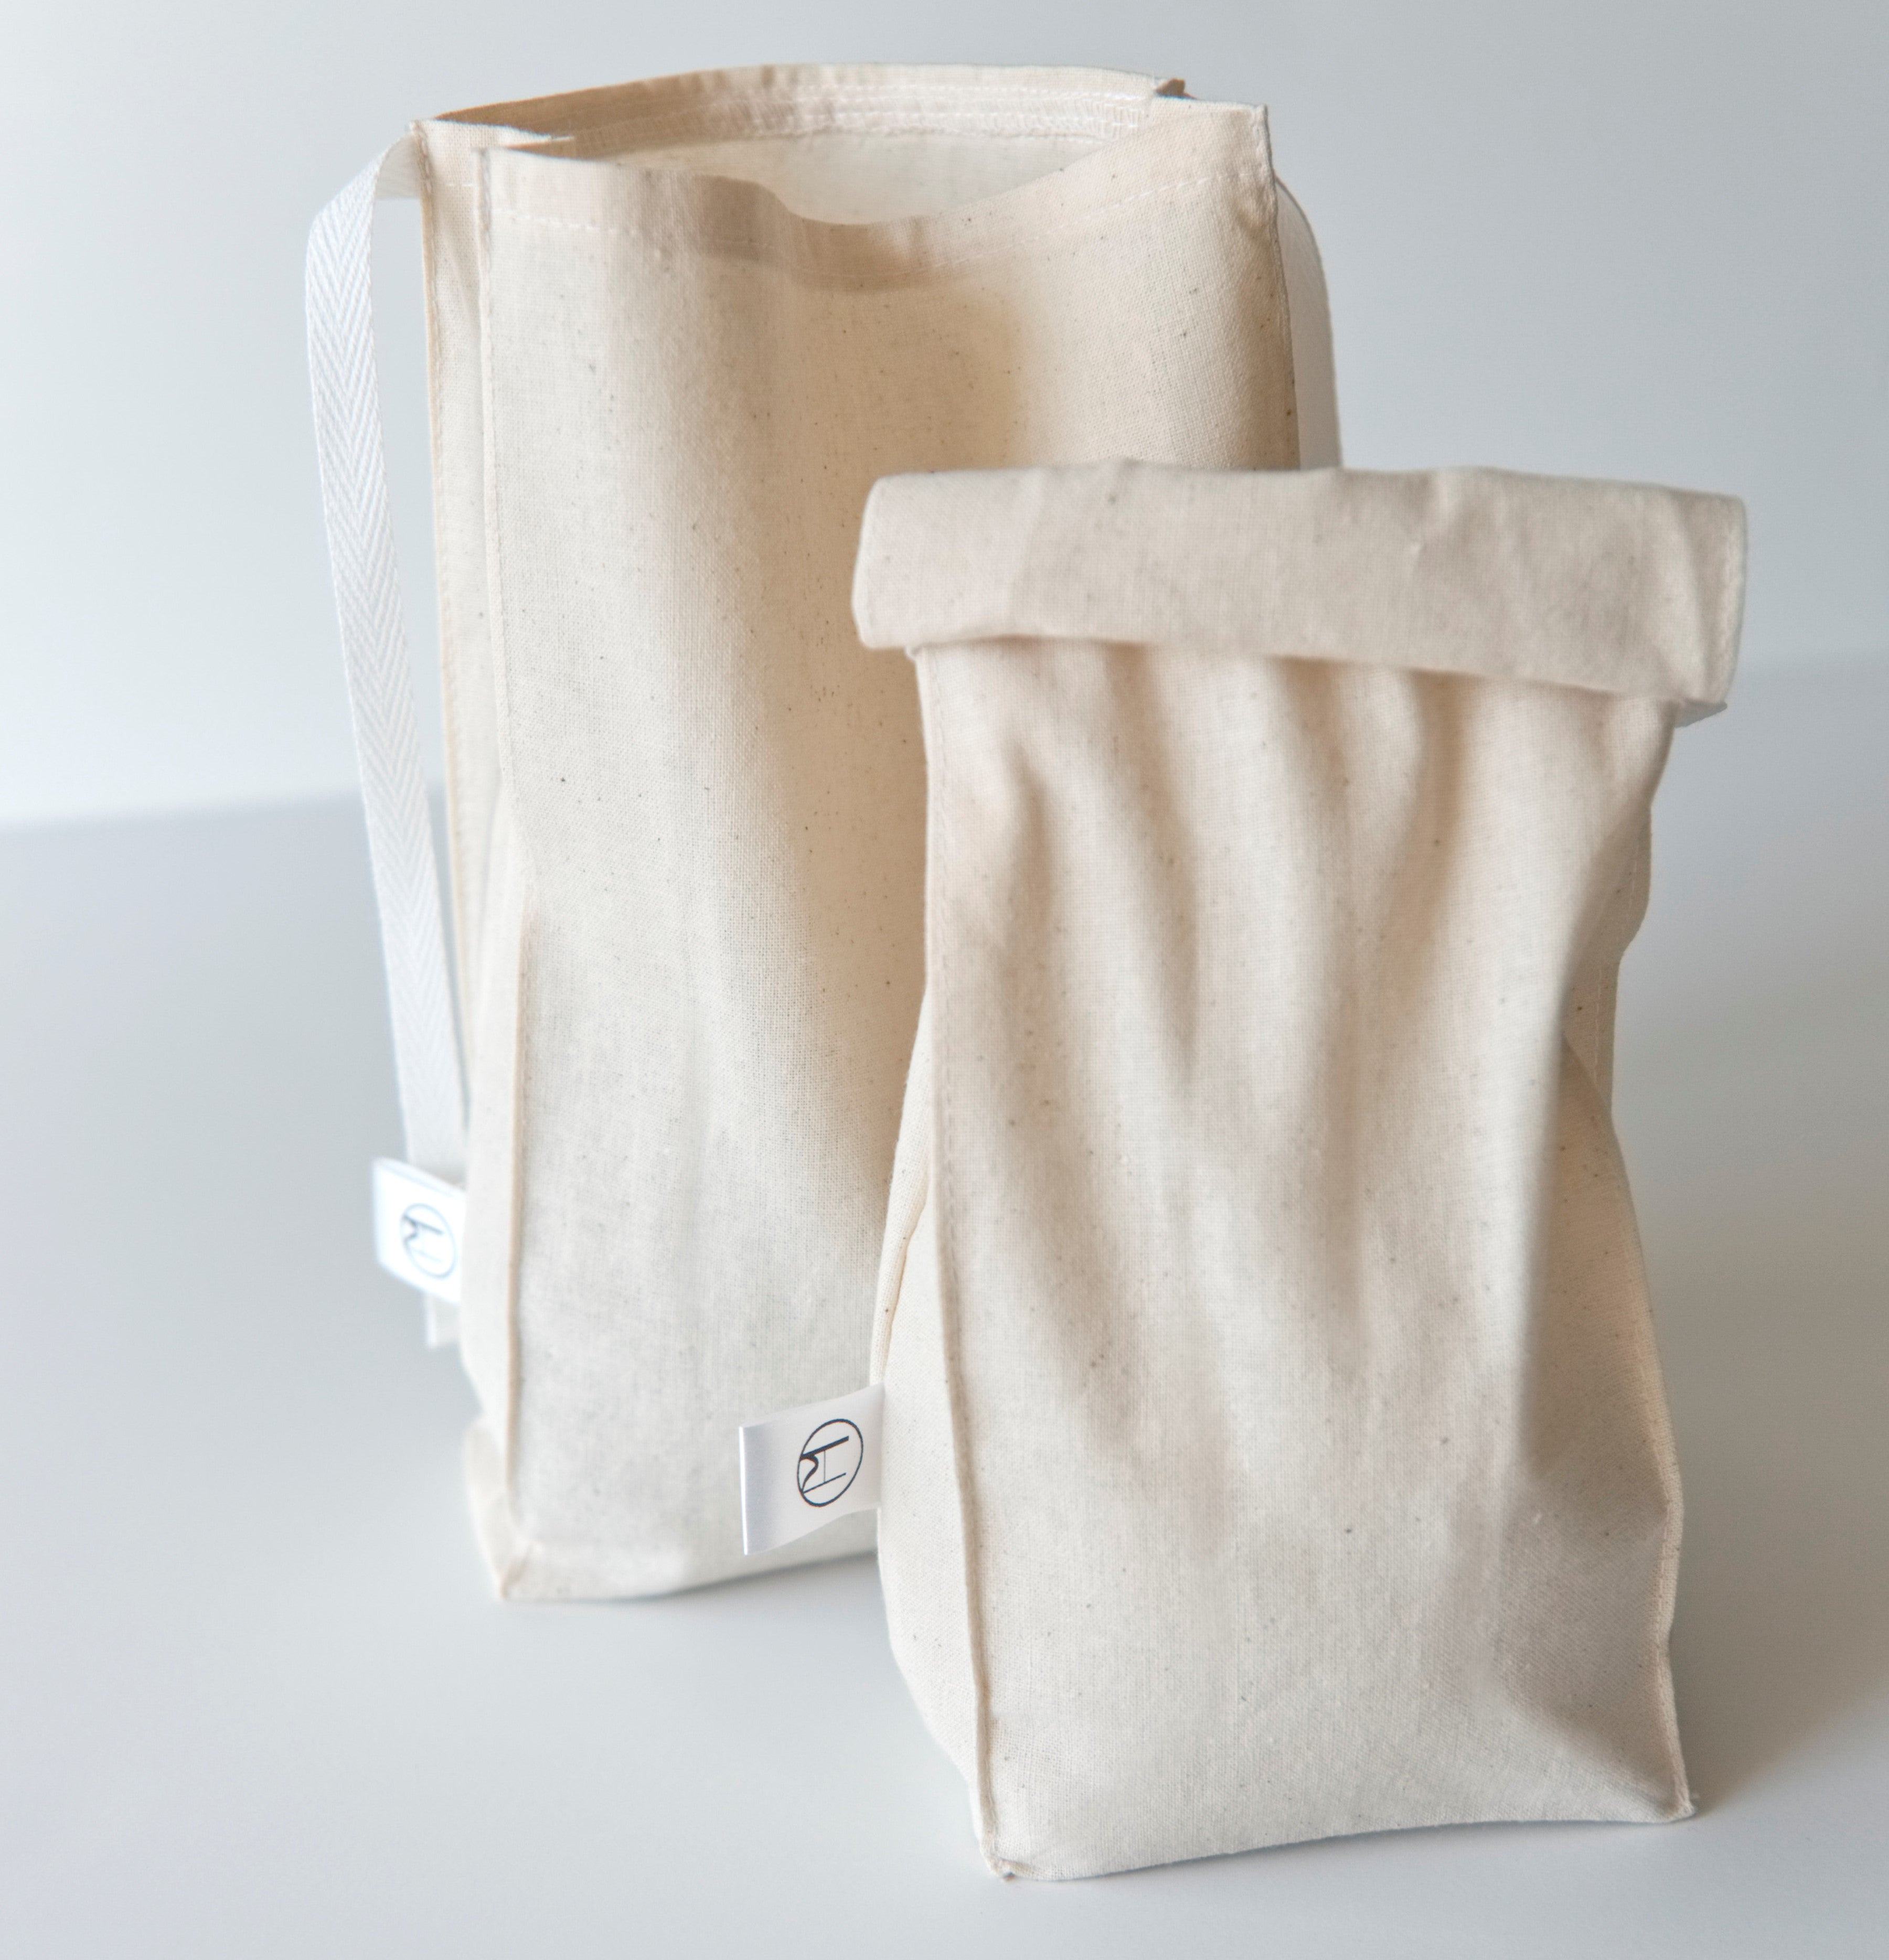 Bulk Lunch Bags Made With 100% Organic Cotton